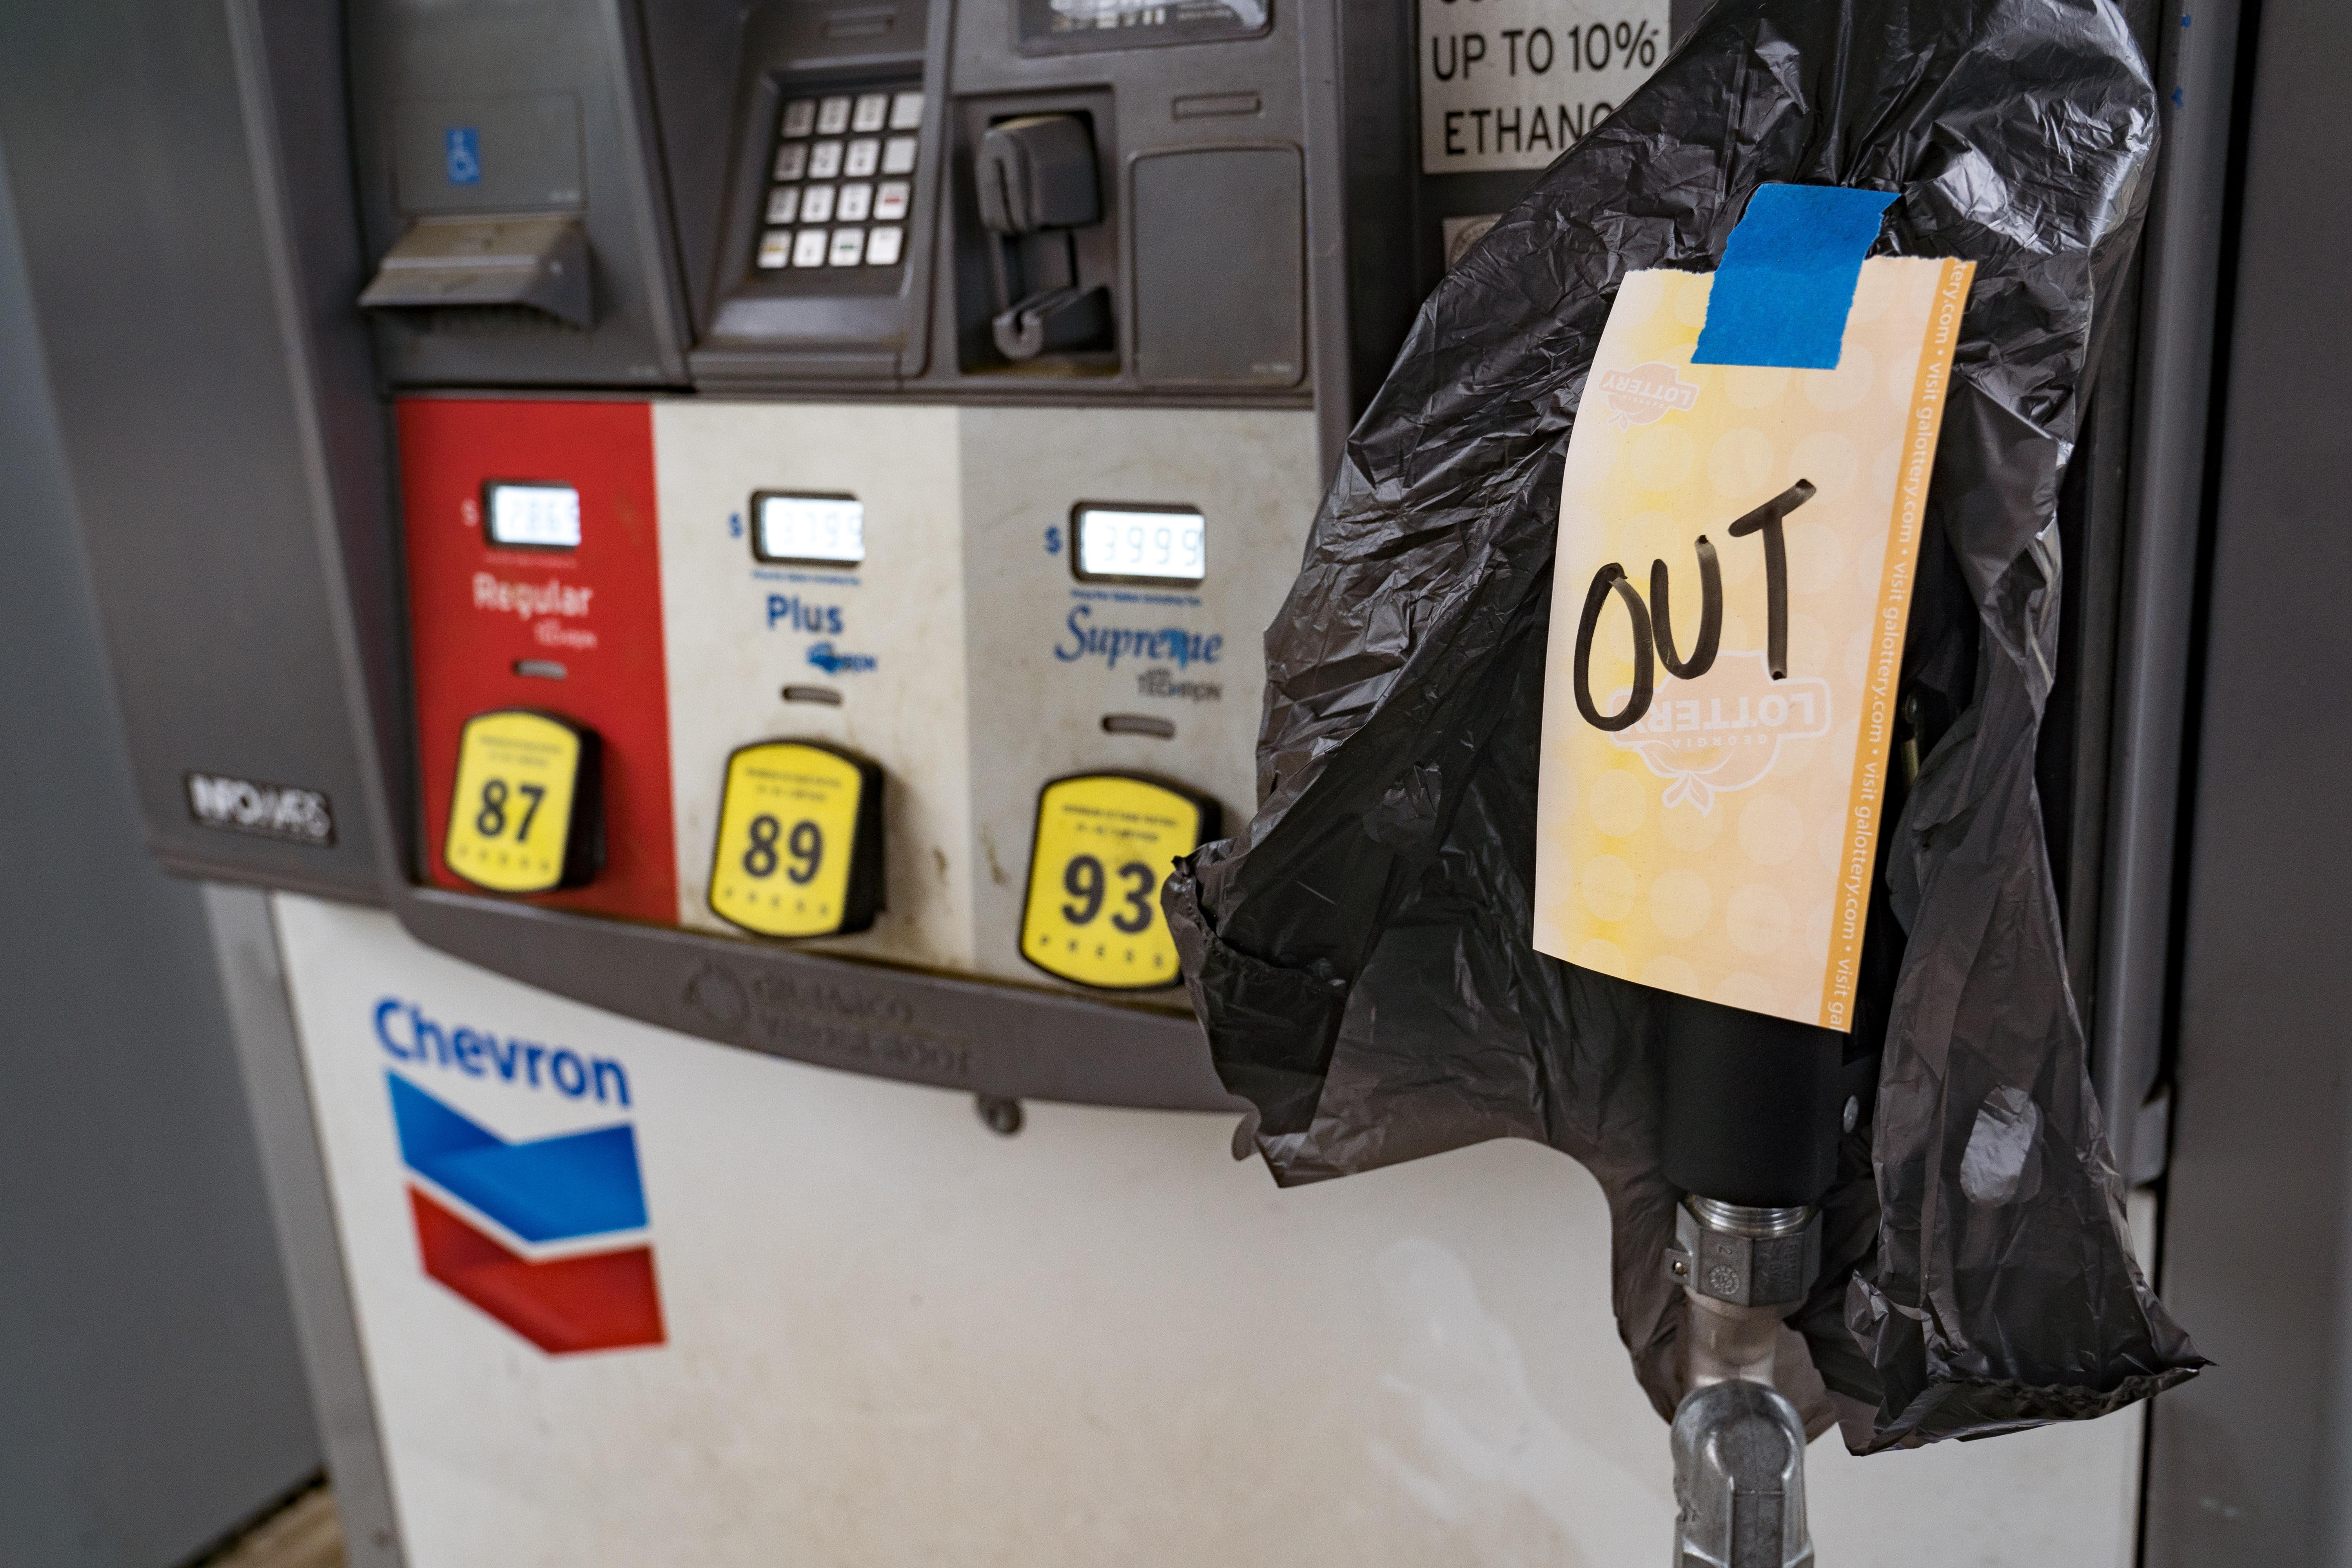 At a gas pump, the handle is covered with a trash bag that says "OUT."